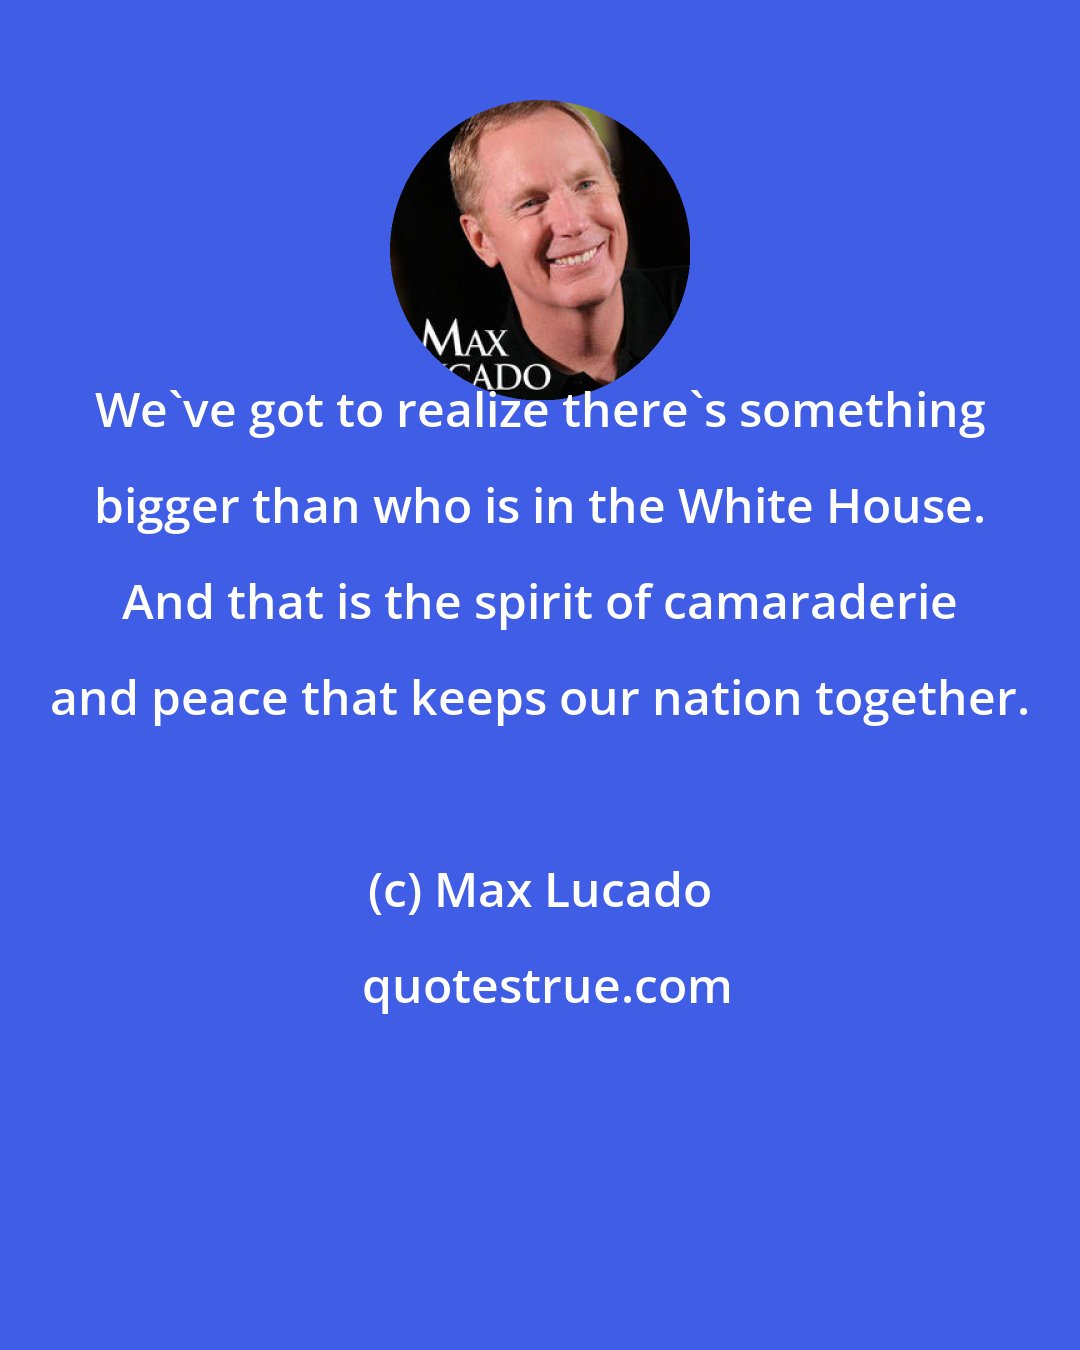 Max Lucado: We've got to realize there's something bigger than who is in the White House. And that is the spirit of camaraderie and peace that keeps our nation together.